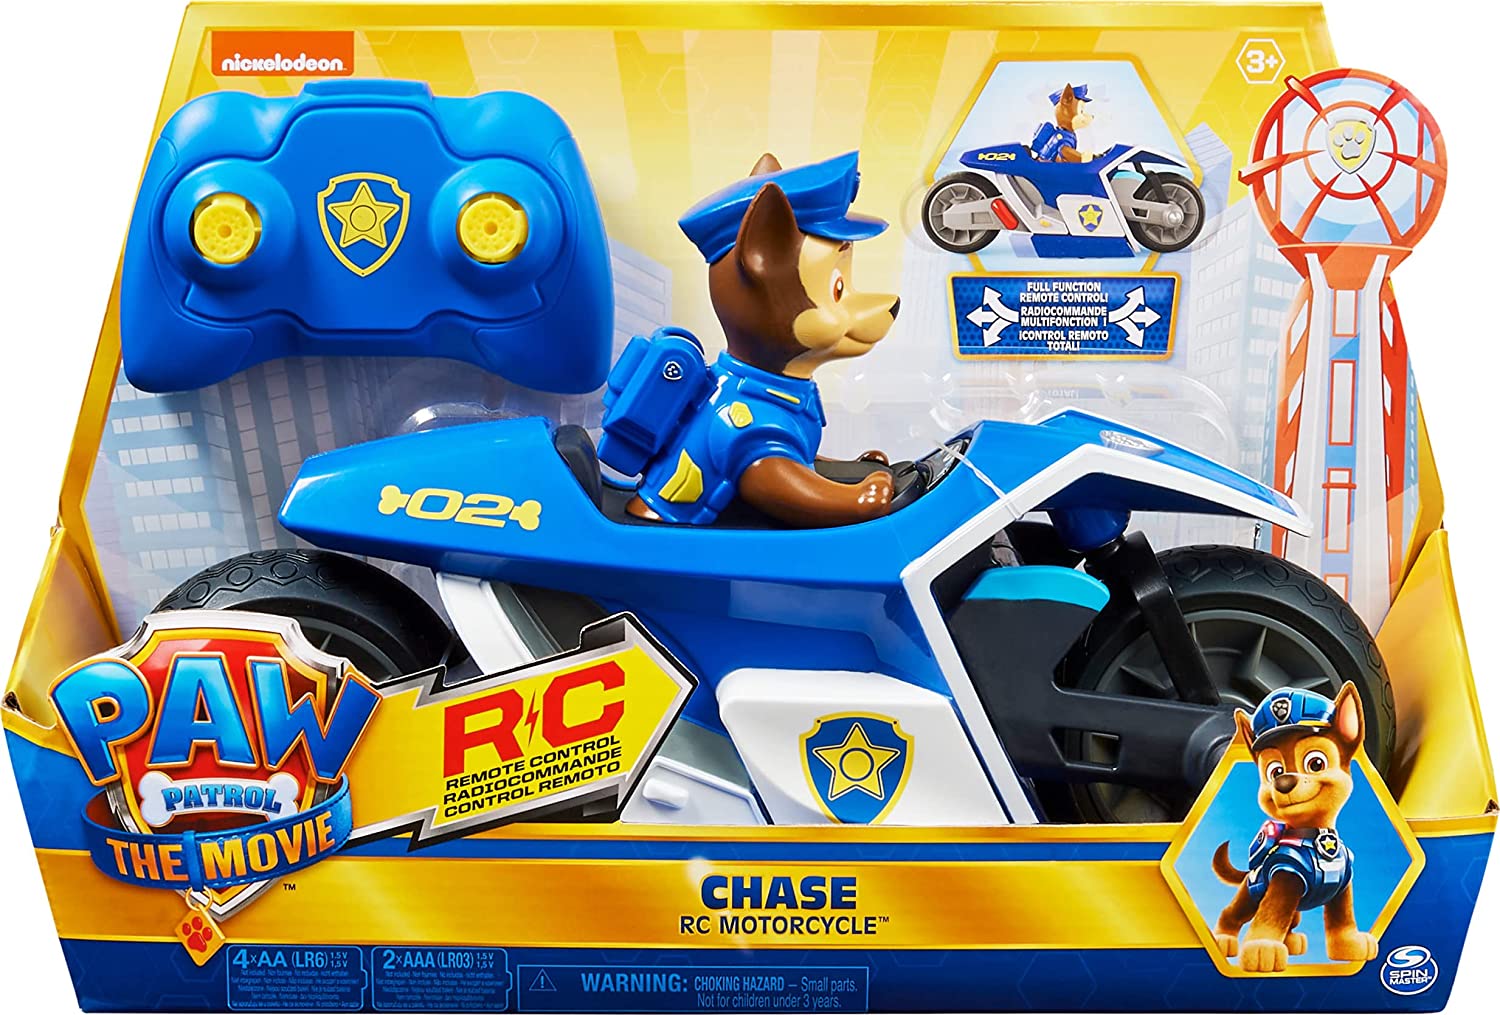 Chase Paw Patrol remote control motorcycle